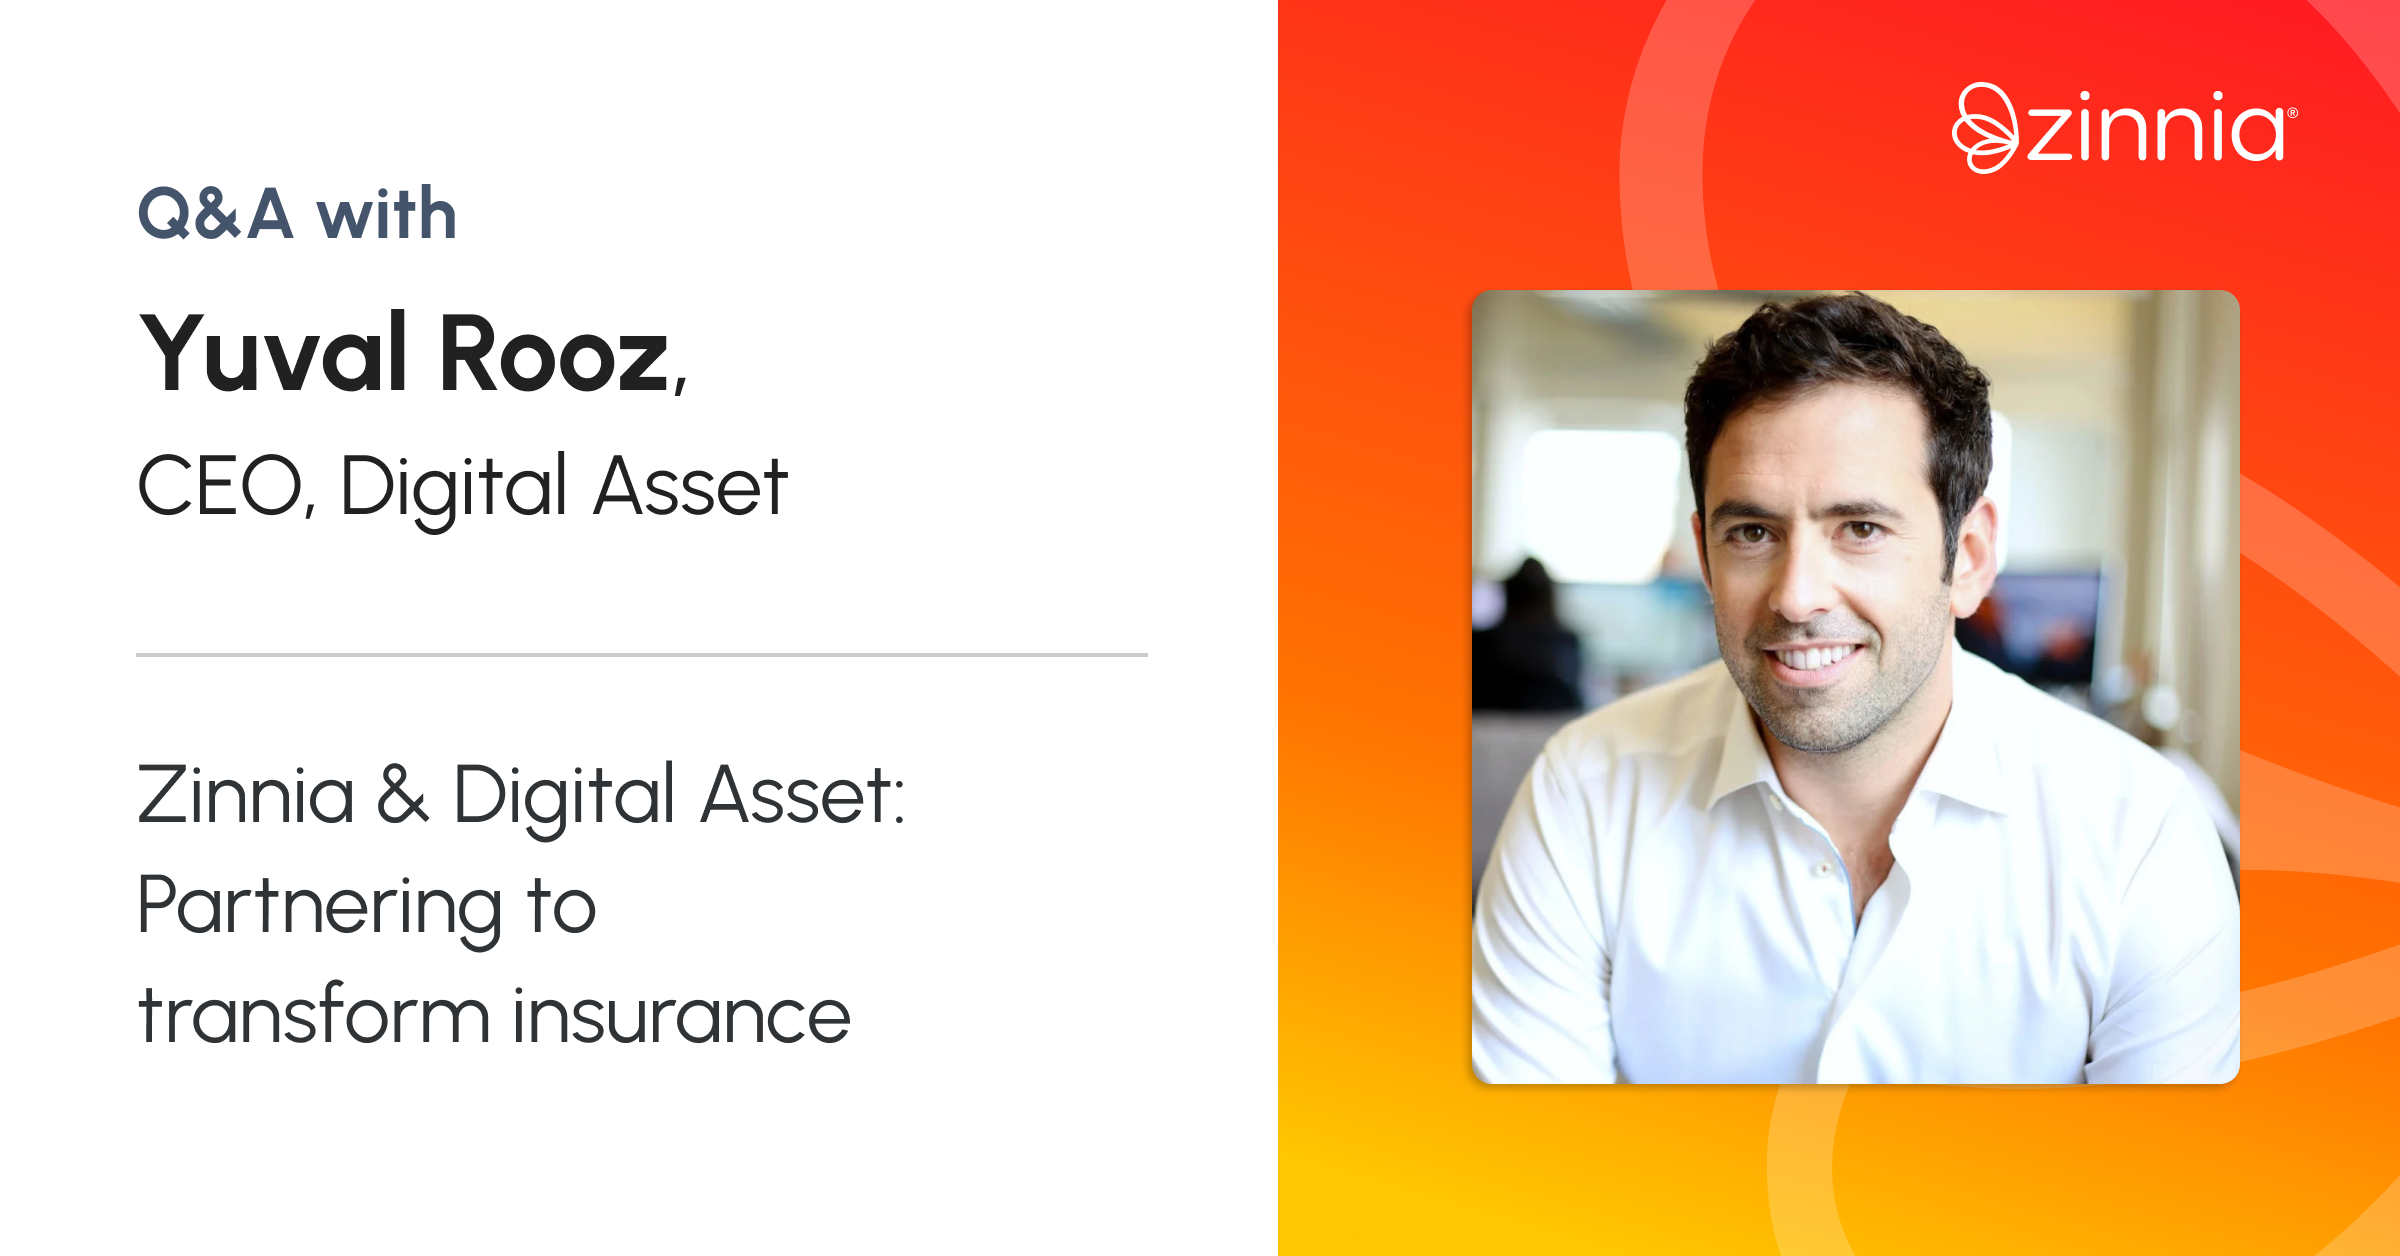 Q&A with Yuval Rooz, CEO of Digital Asset. Zinnia & Digital Asset: Partnering to transform insurance. The image features a photo of Yuval Rooz smiling, with the Zinnia logo in the top right corner on an orange gradient background.